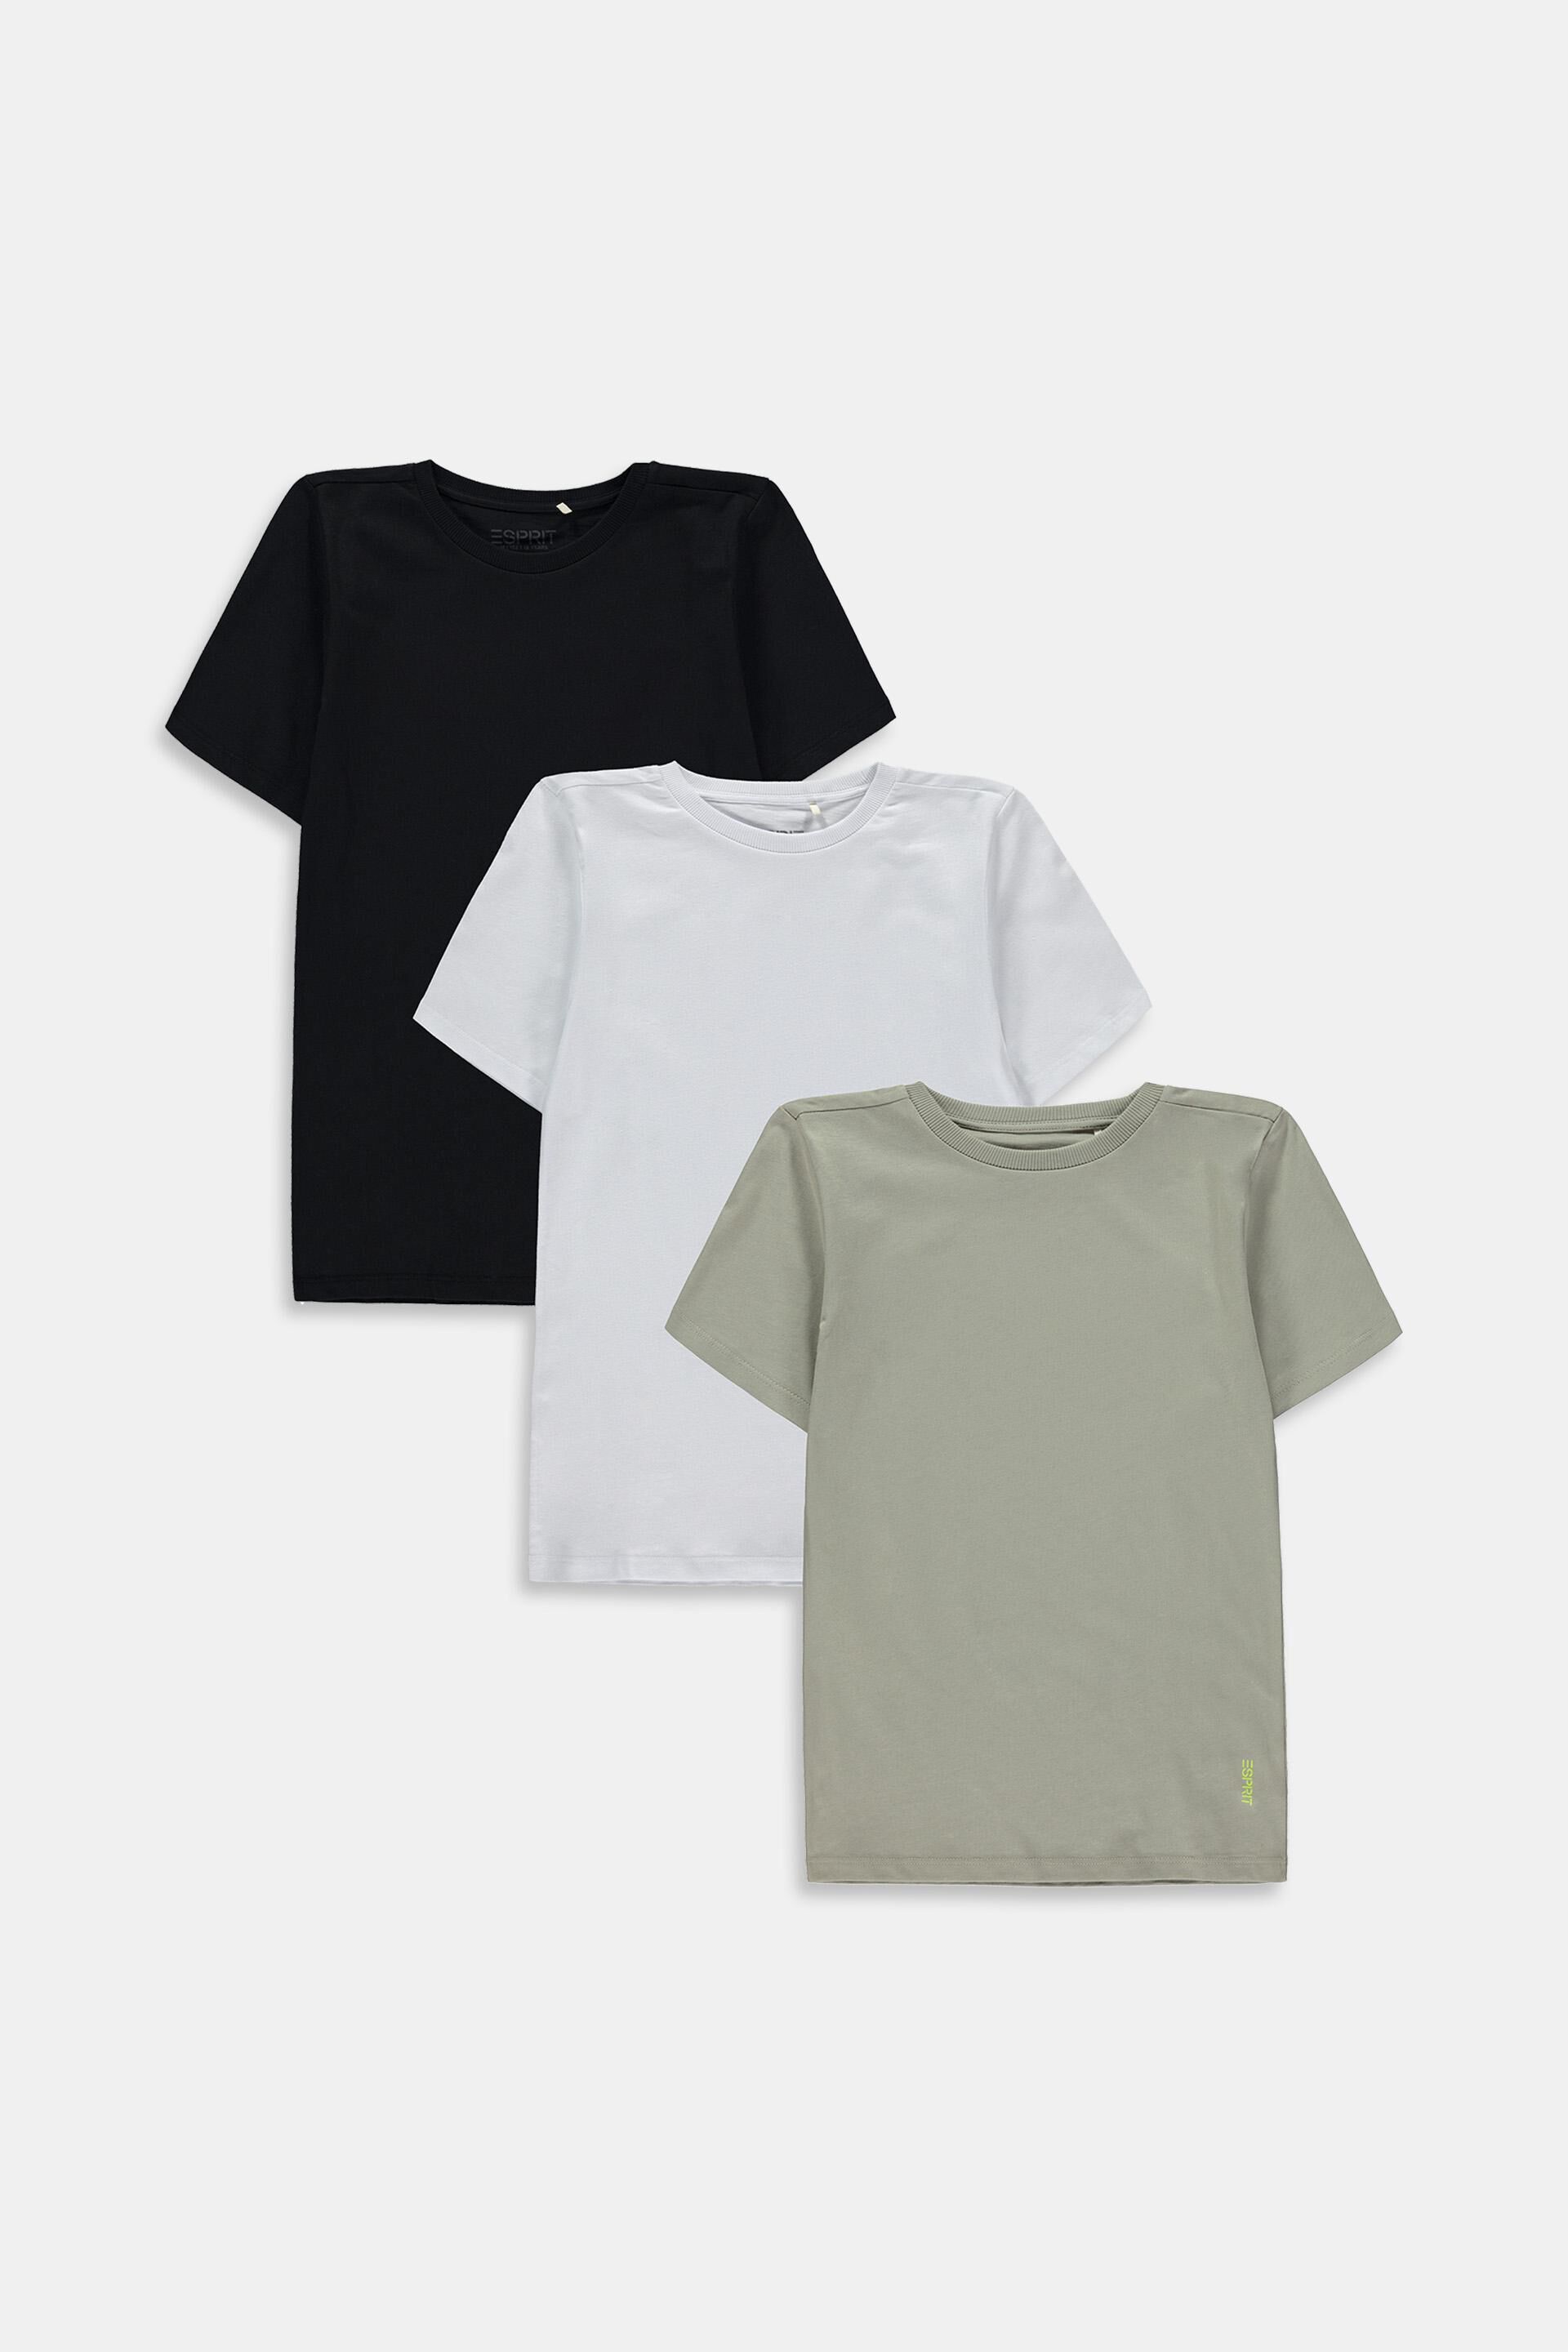 Edc By Esprit 3-pack of pure cotton t-shirts